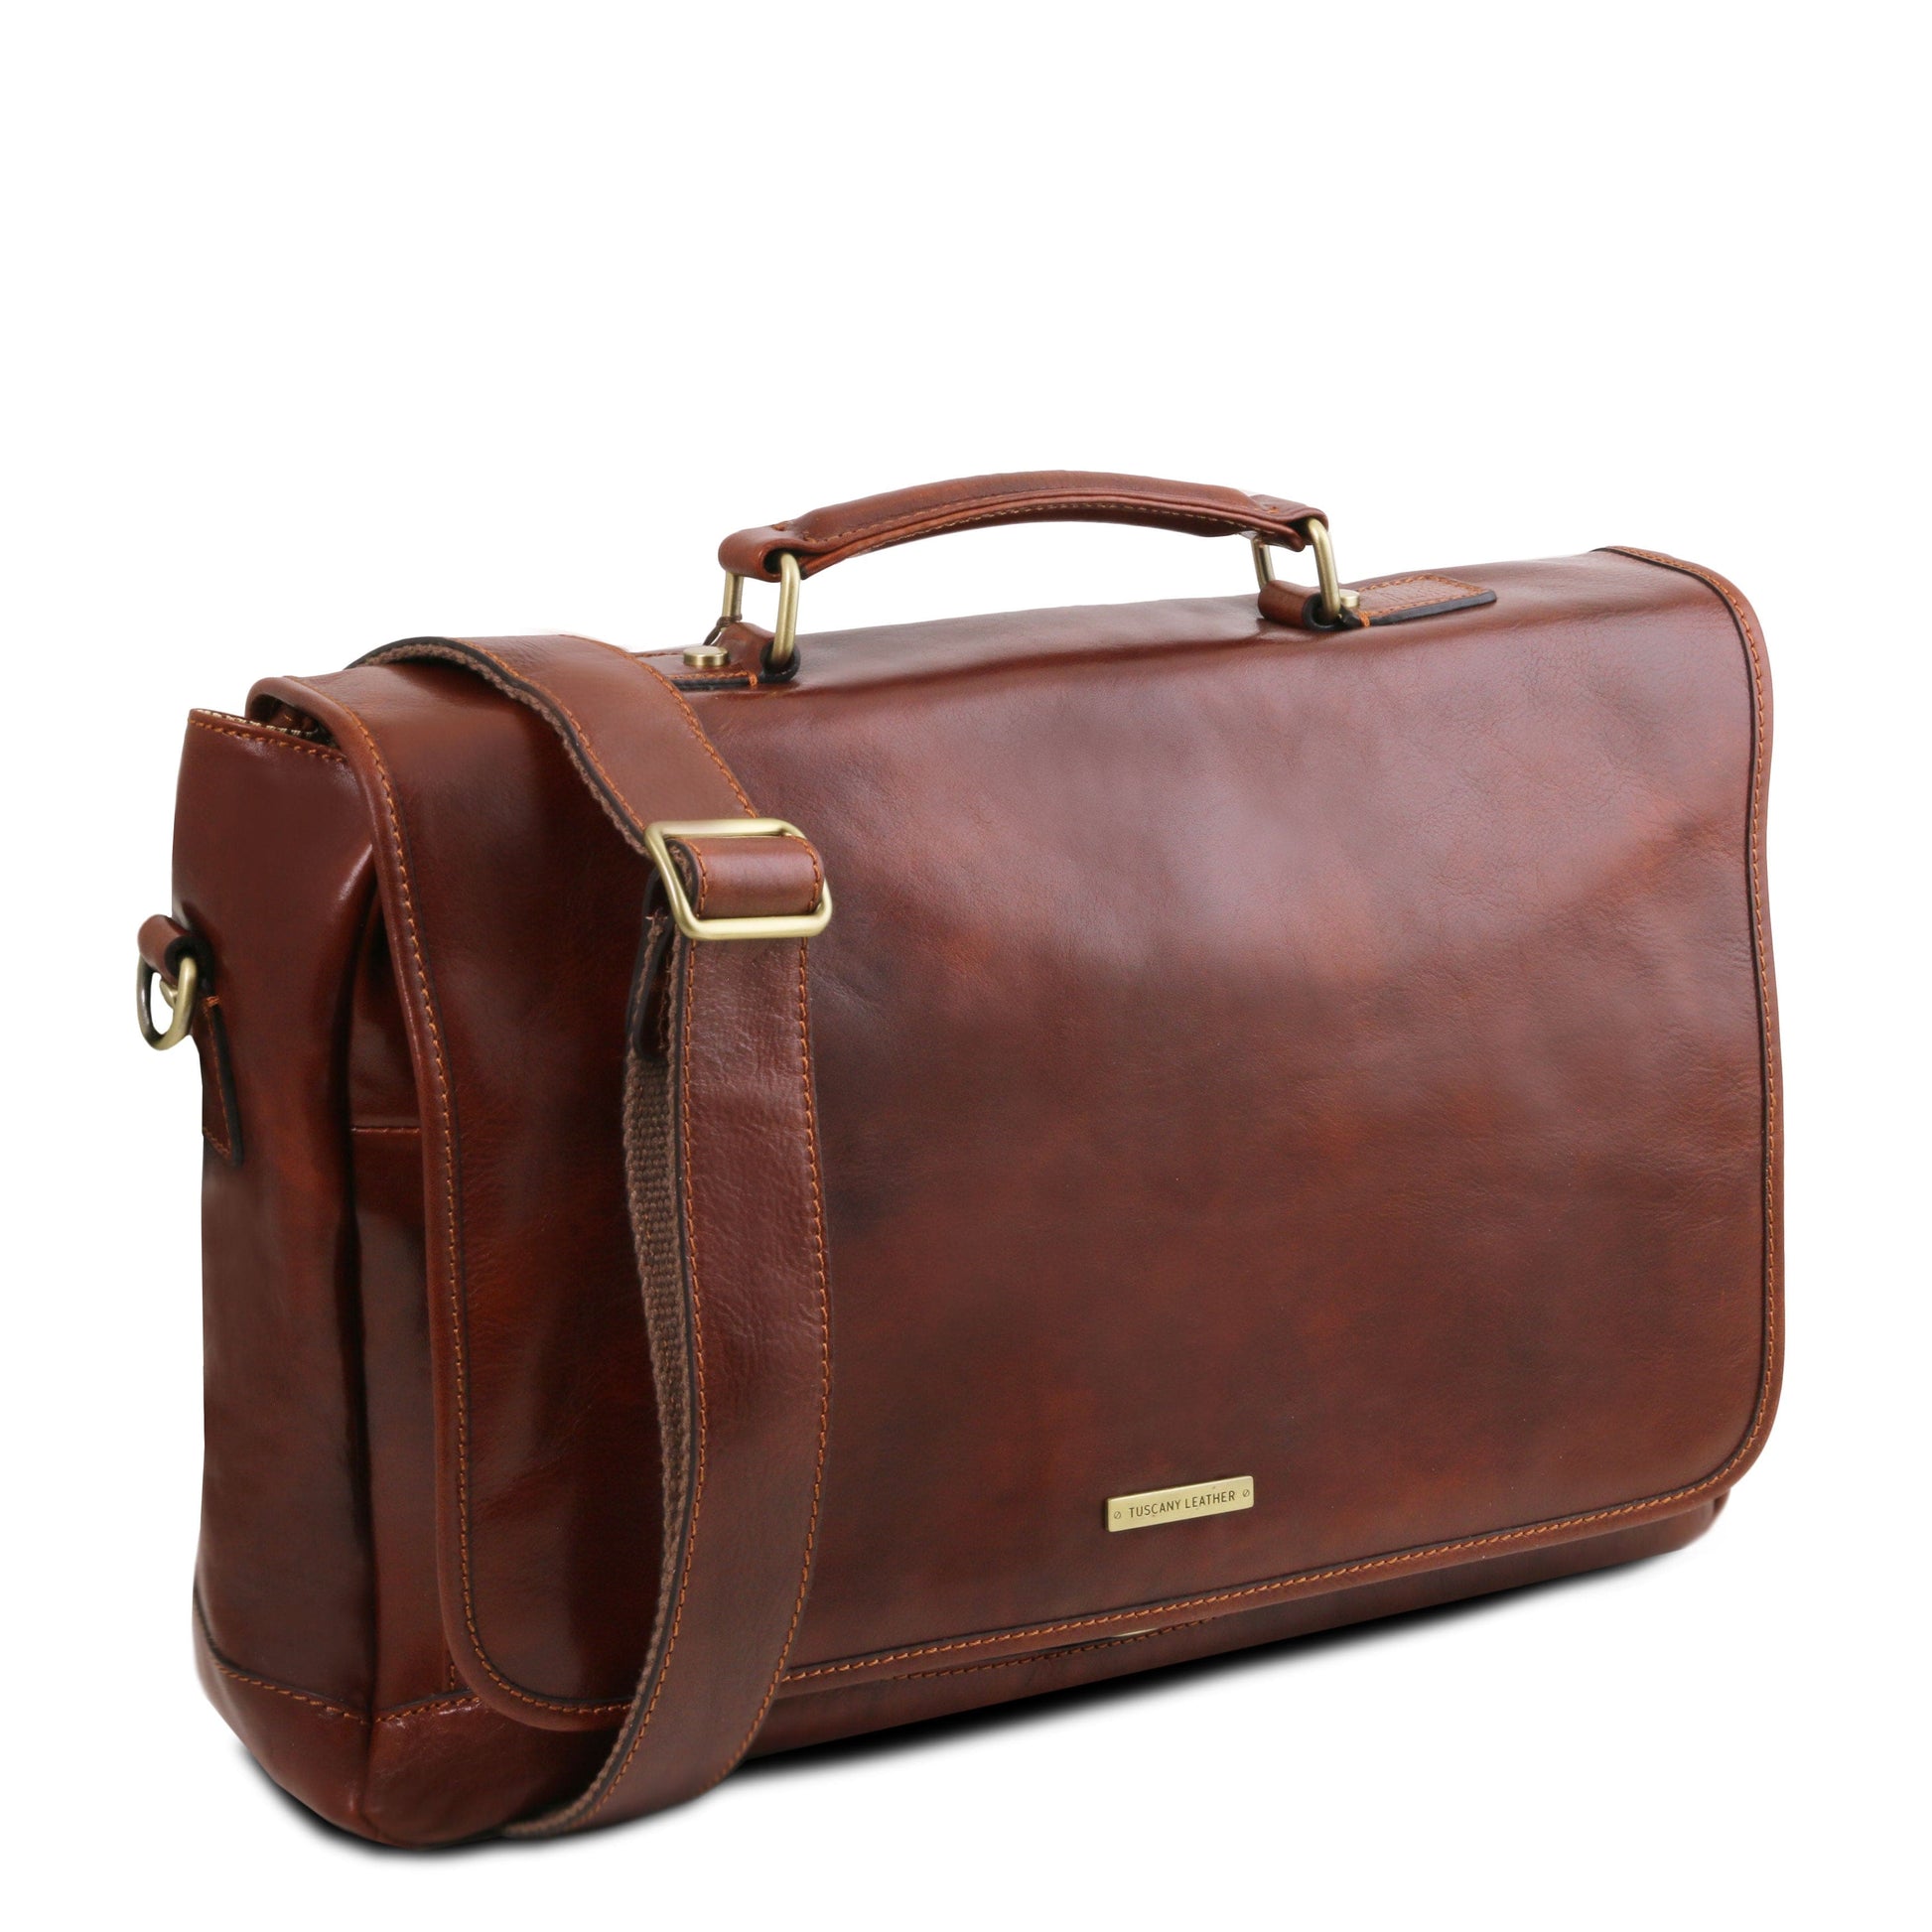 Mantova - Leather multi compartment TL SMART briefcase with flap | TL142068 messenger bag - Premium Leather briefcases - Shop now at San Rocco Italia